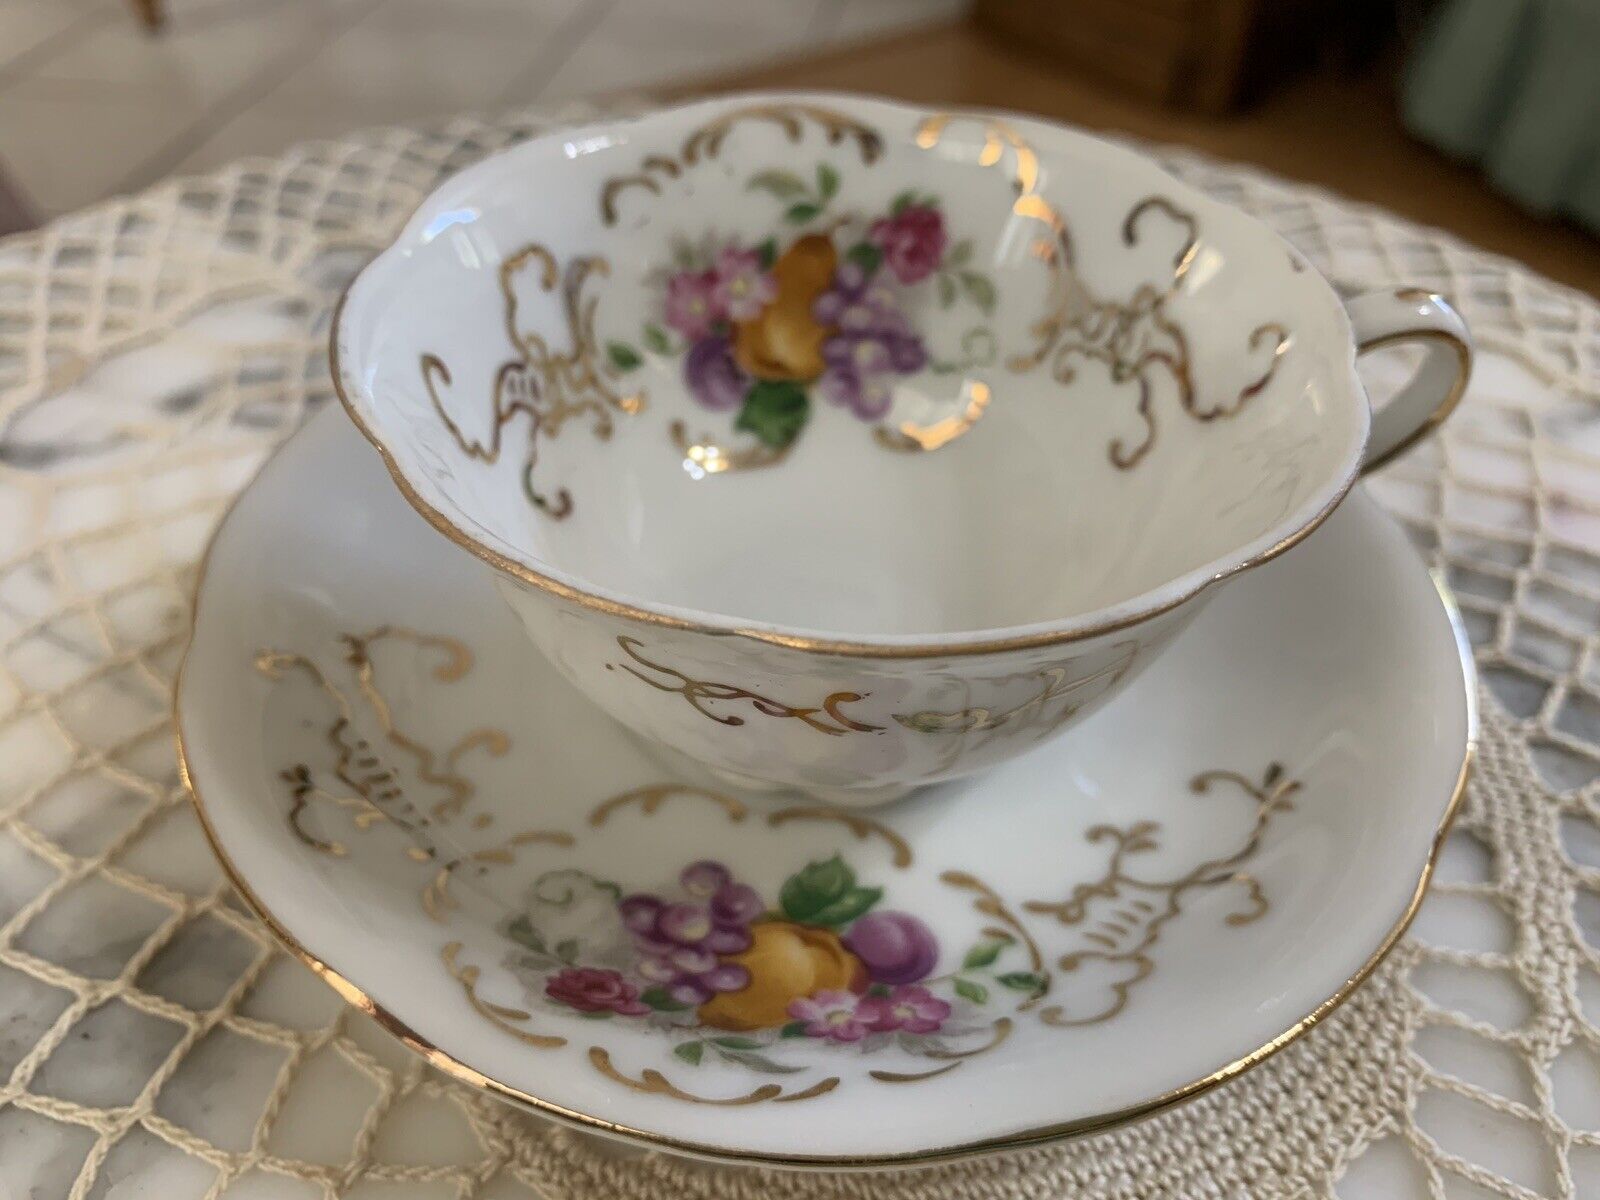 Demitasse Cup & Saucer Gold Trim W/ Flowers & Fruit Good Condition